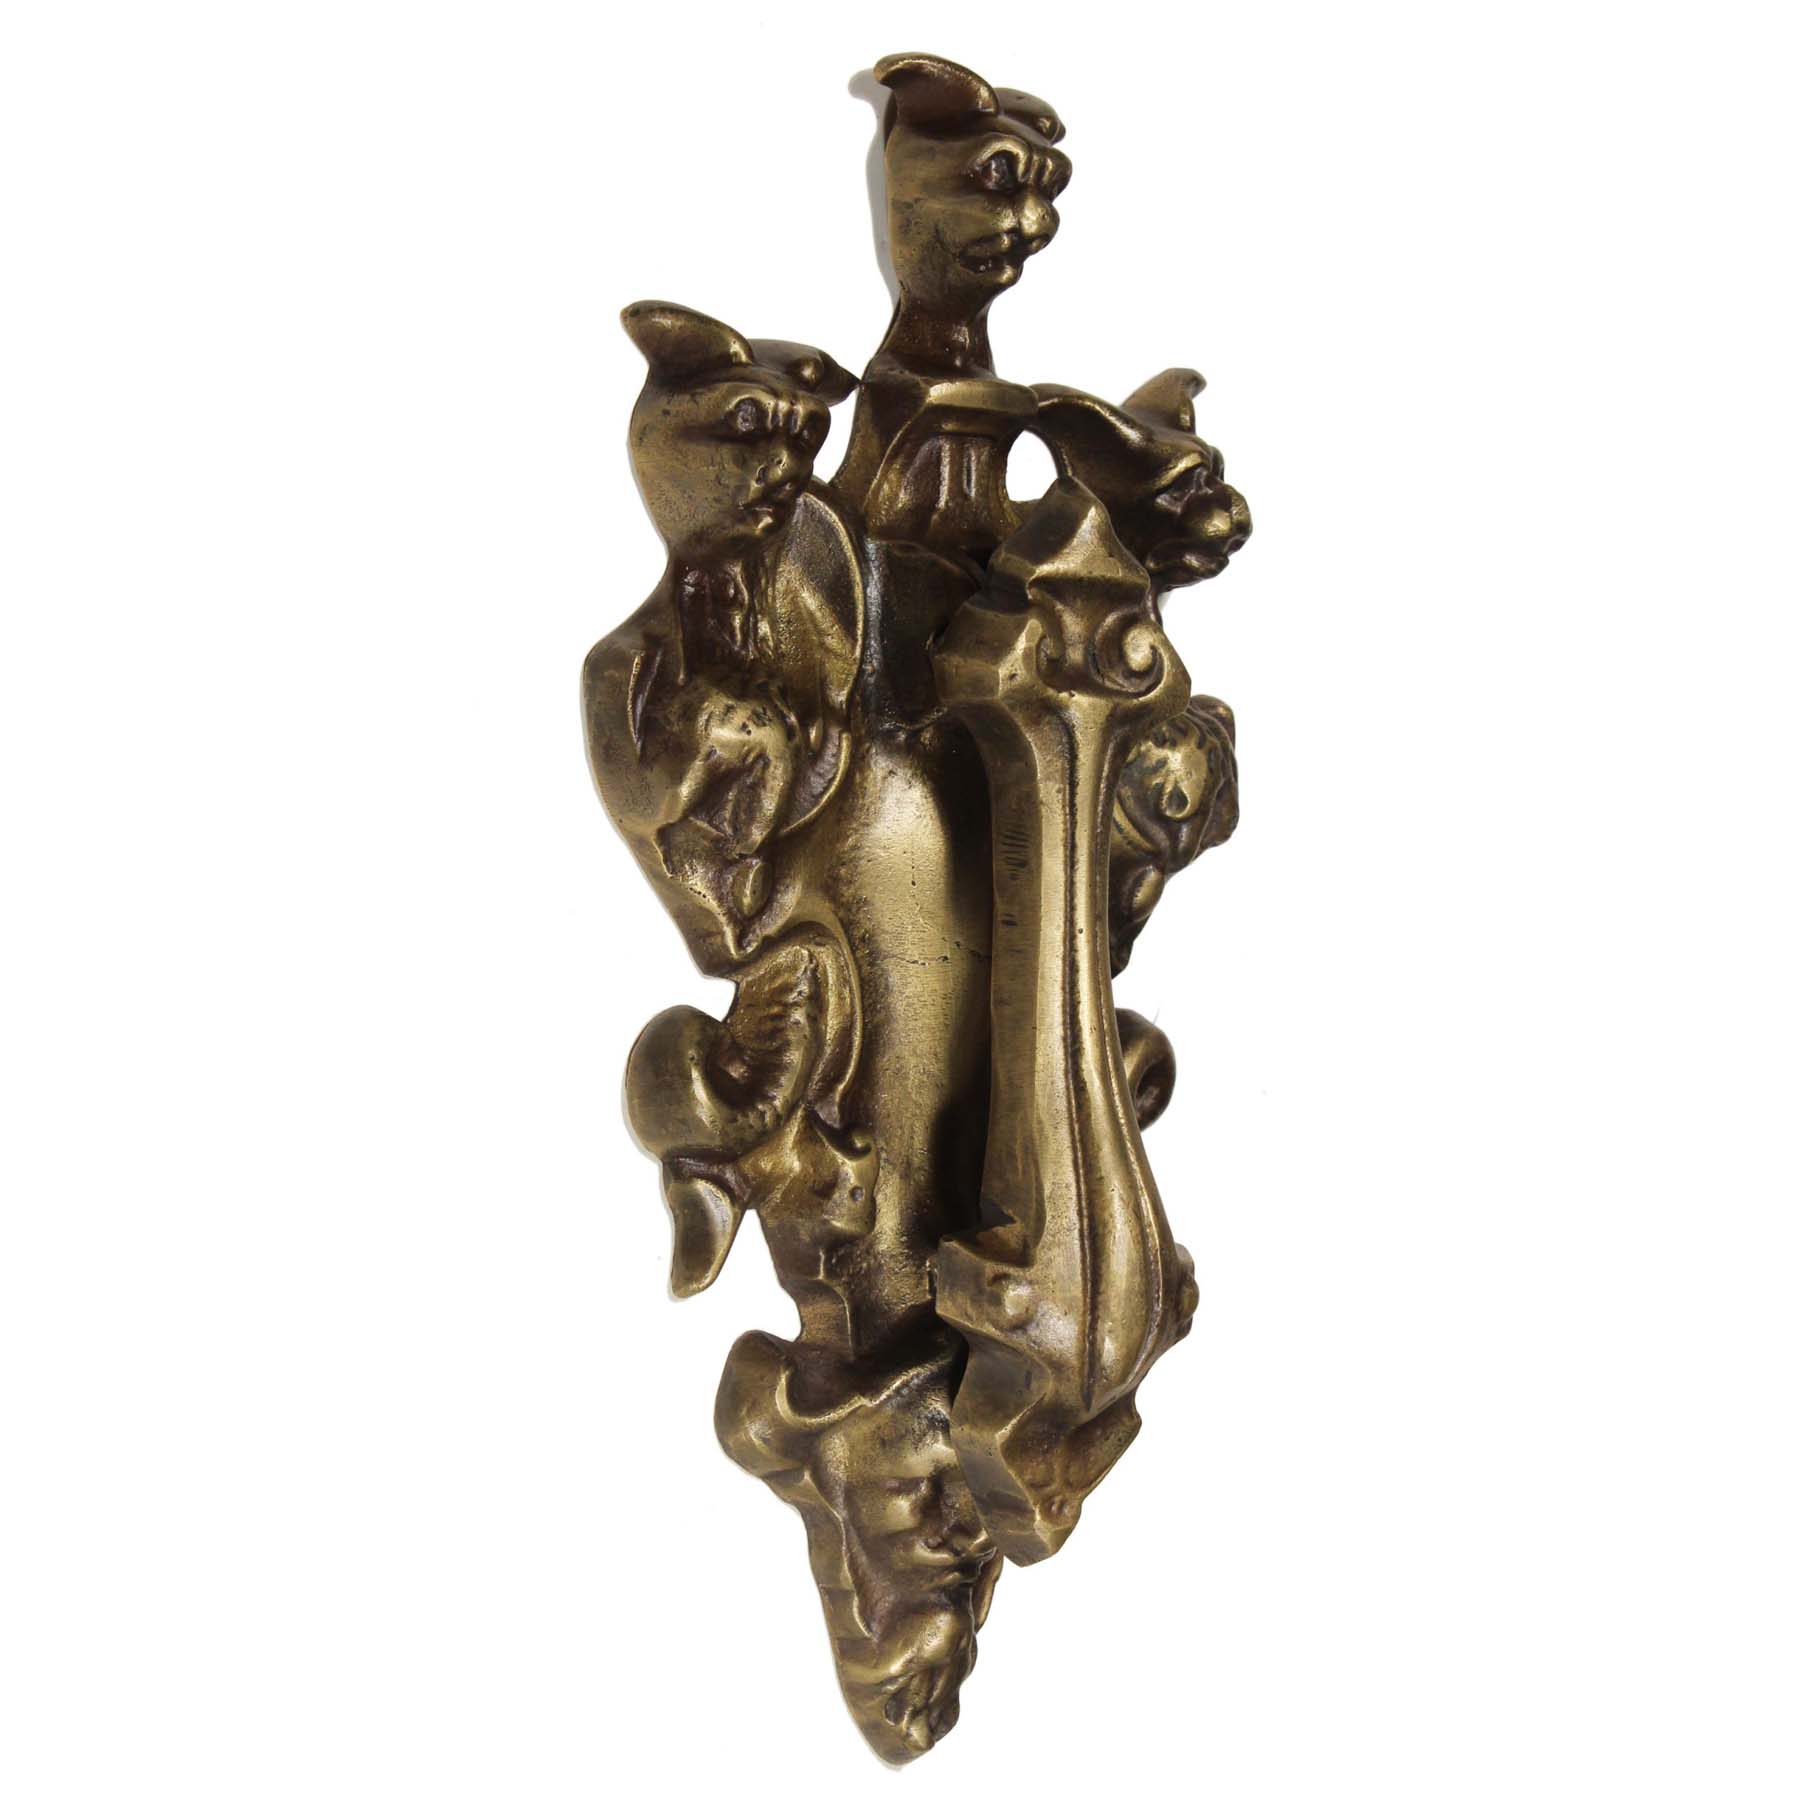 Substantial Vintage Figural Door Knocker with Devil and Gargoyles, Early 1900s-69891